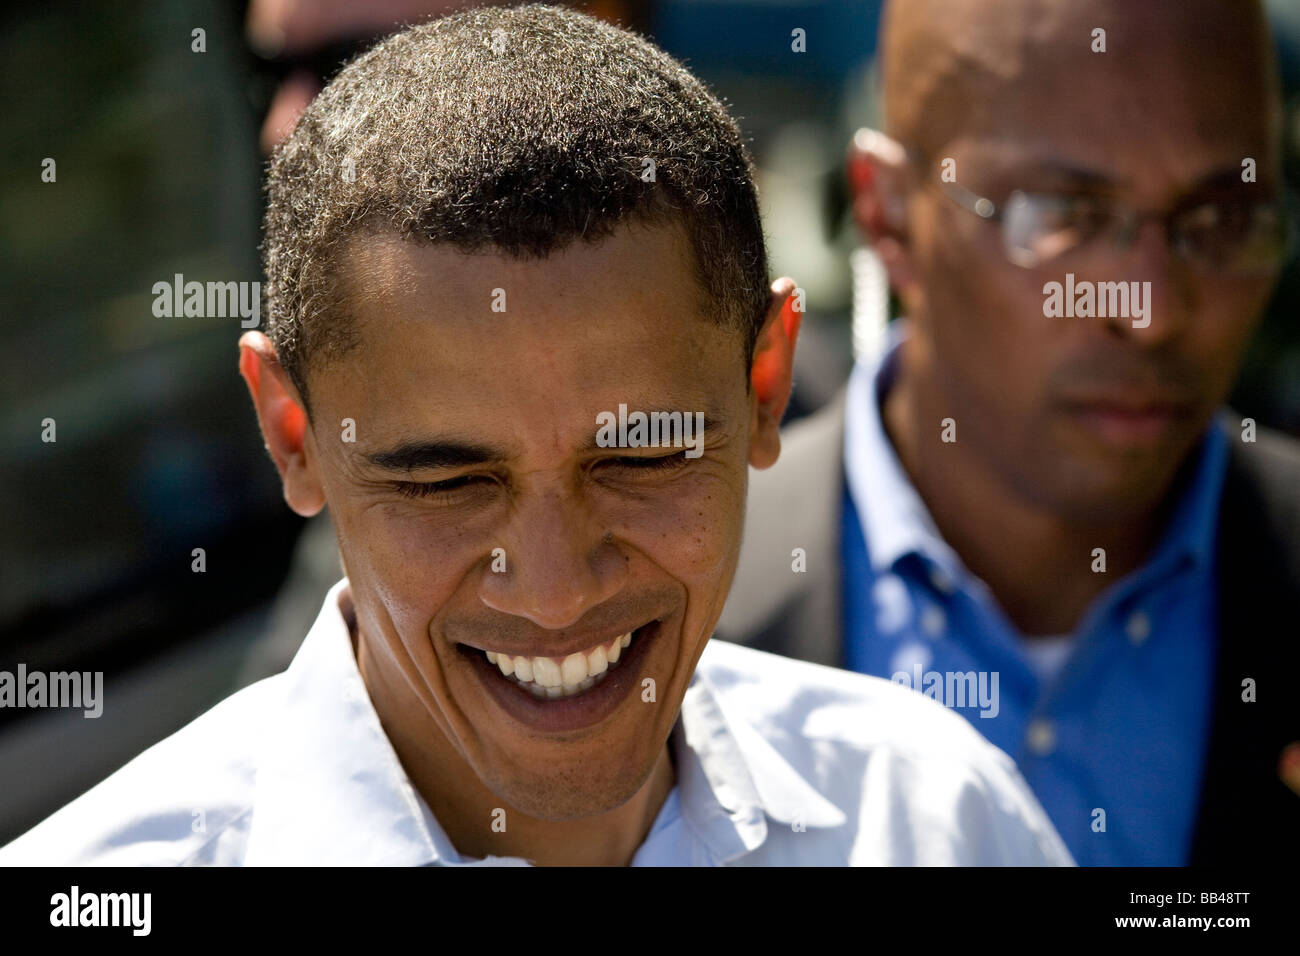 Presidential candidate Barack Obama smiles in front of Secret Service agent while greeting members of the crowd following the la Stock Photo